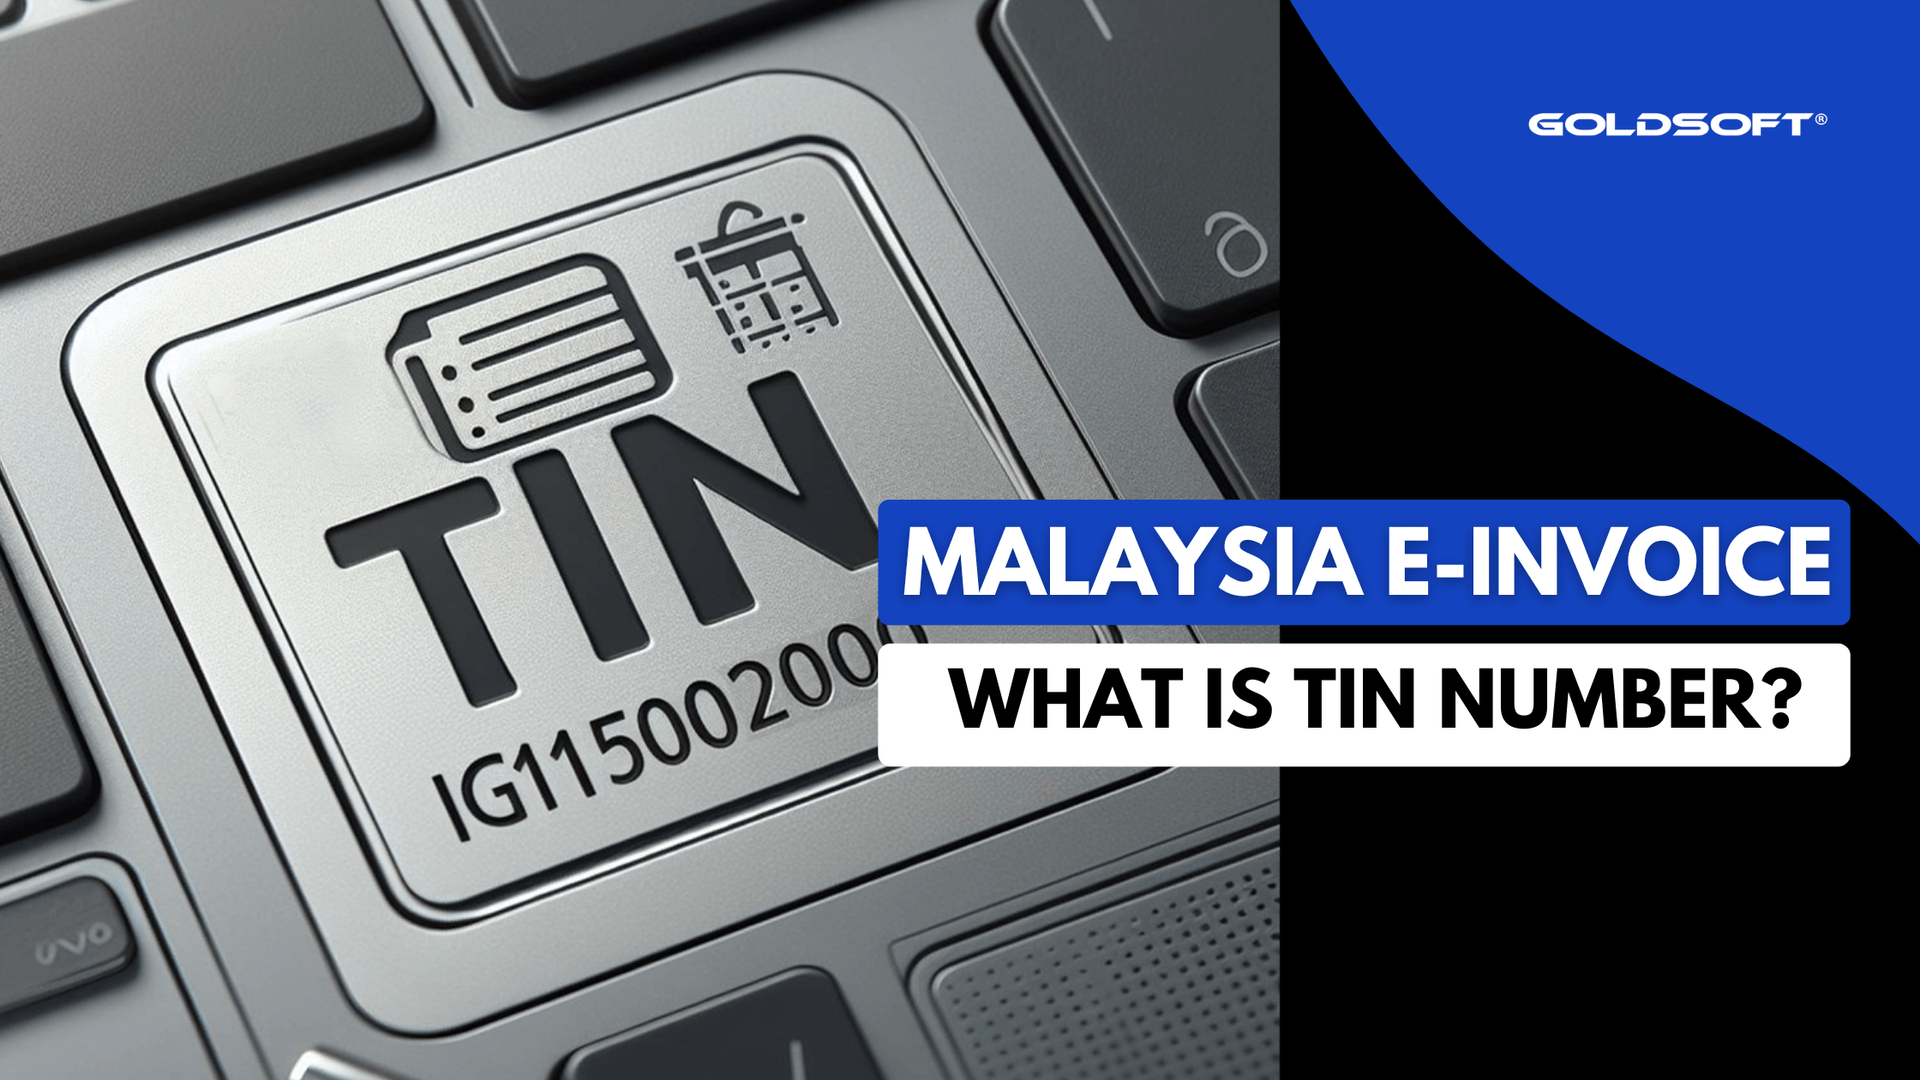 The Tax Identification Number, or TIN, is a number issued by the IRBM for e-invoice tax Malaysia.